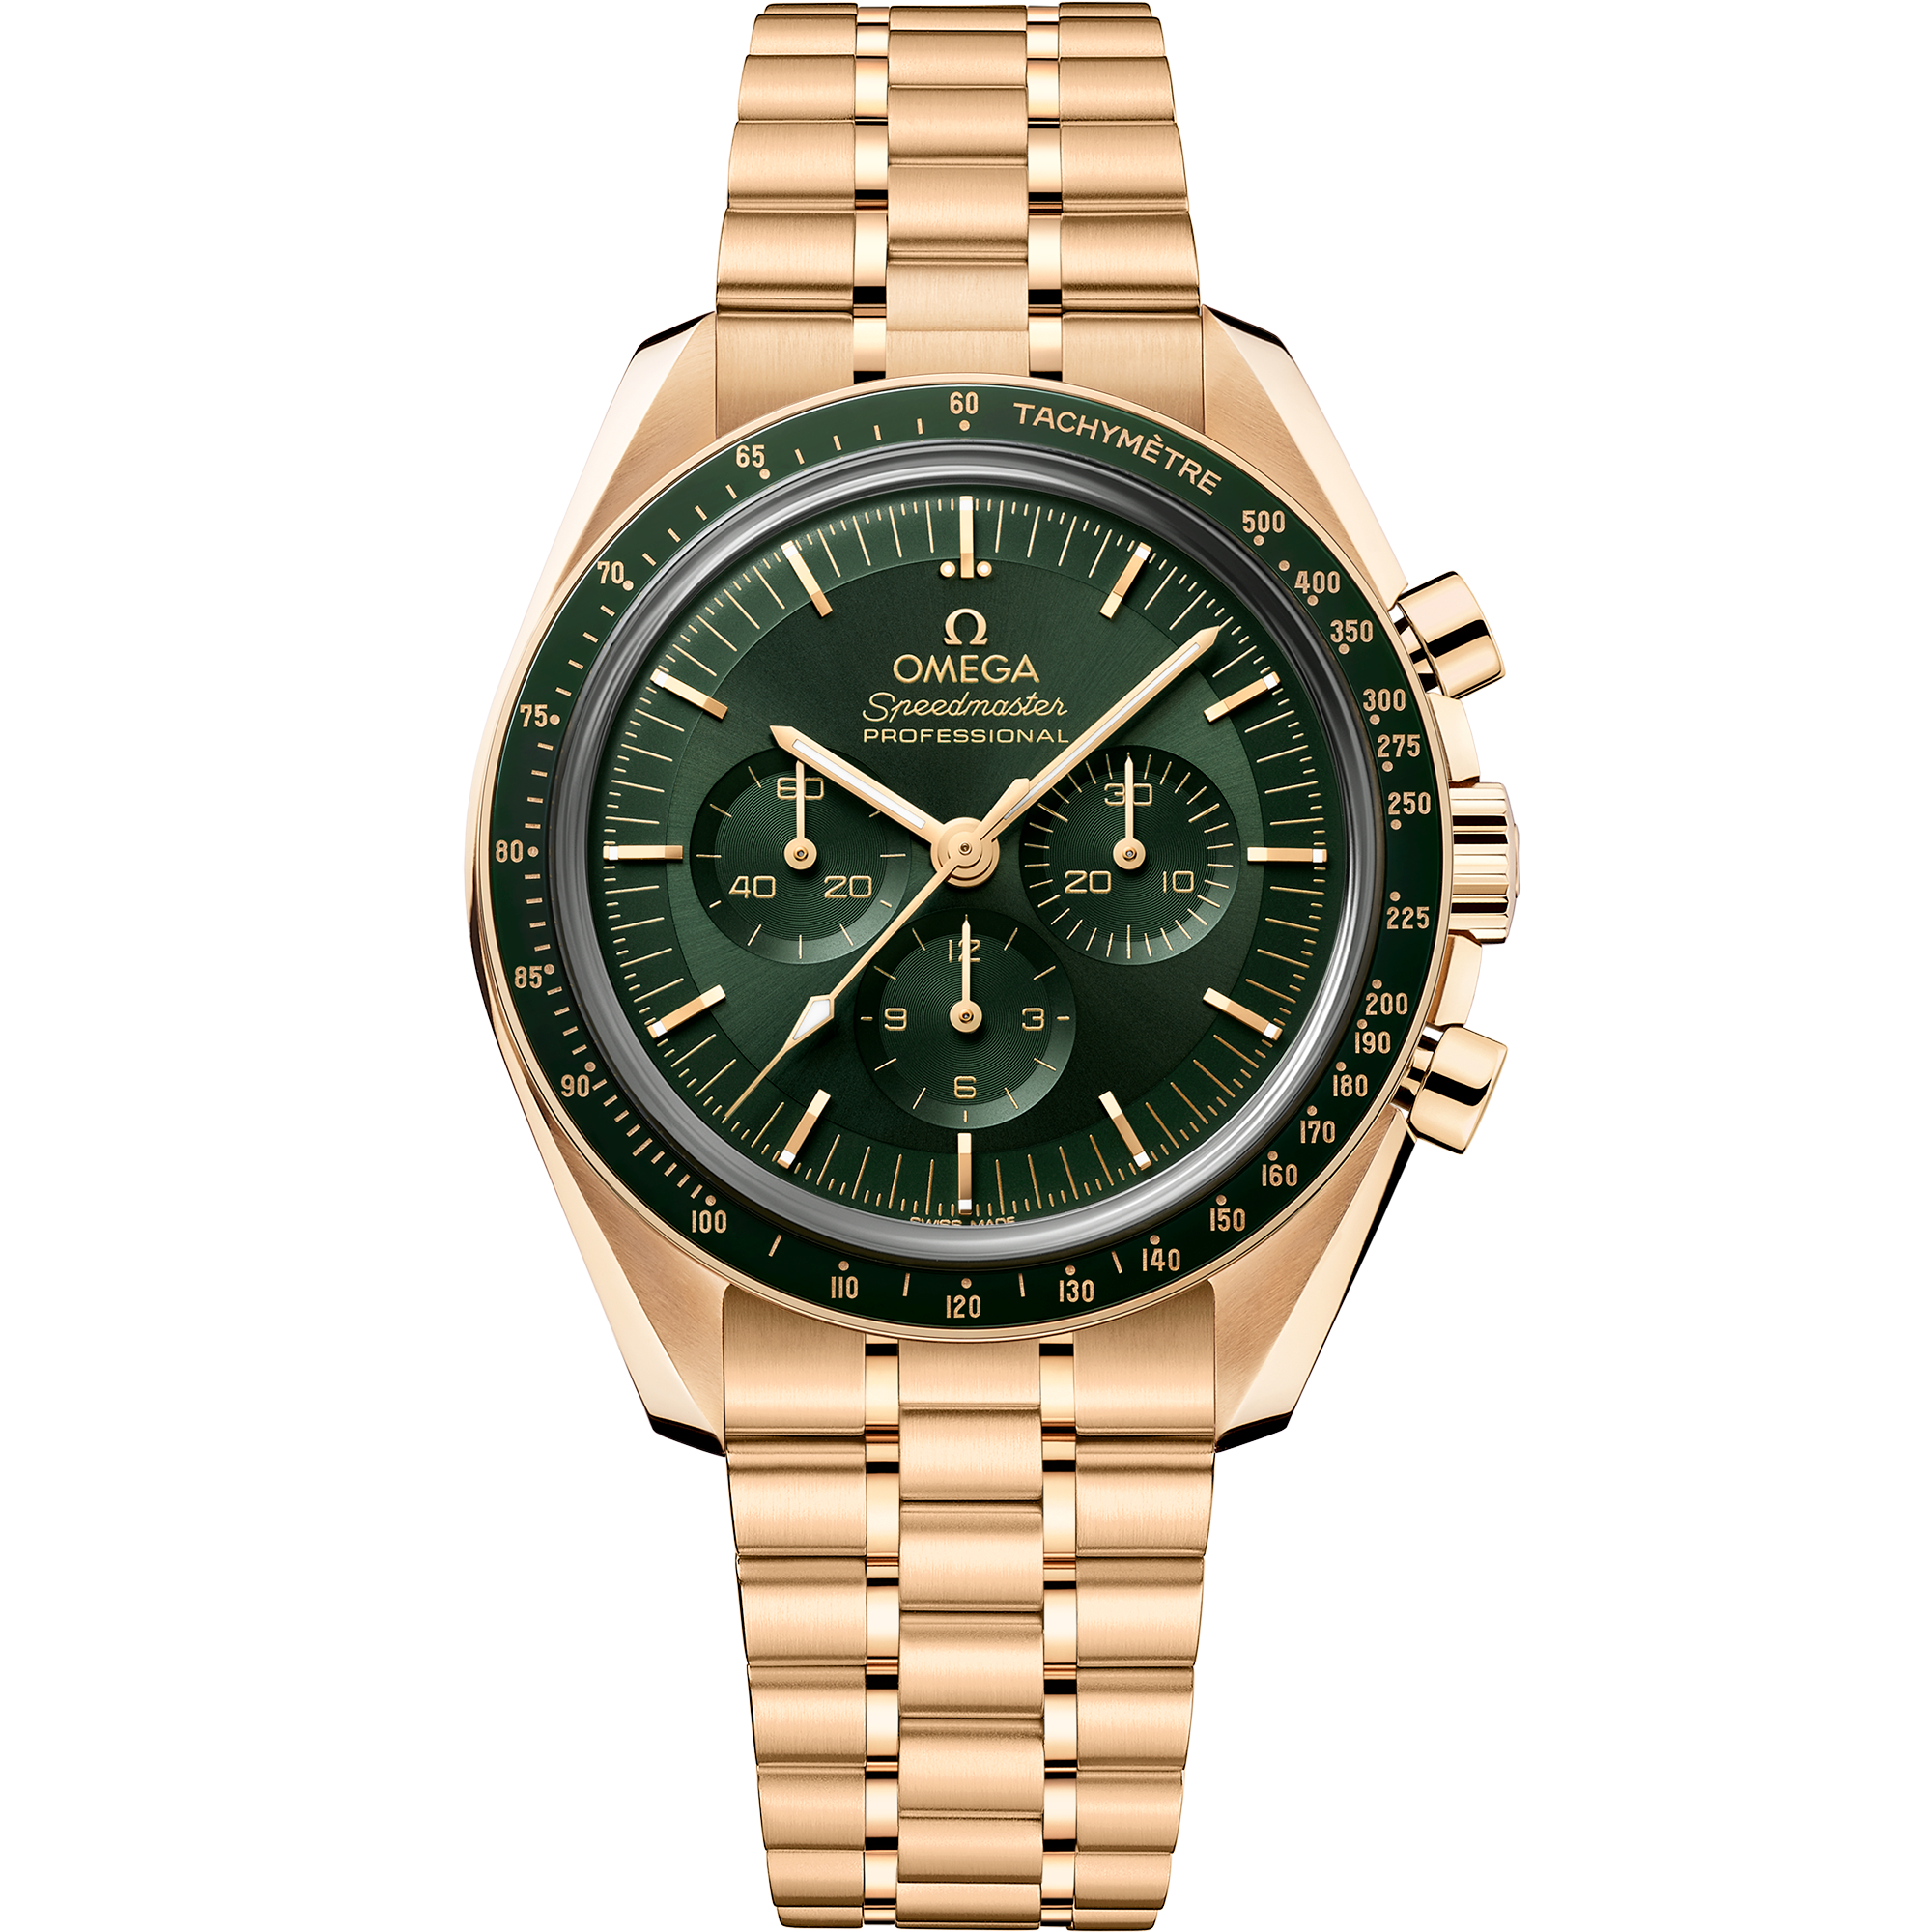 Speedmaster Moonwatch Professional 42 mm, ouro Moonshine™ em ouro Moonshine™ - 310.60.42.50.10.001